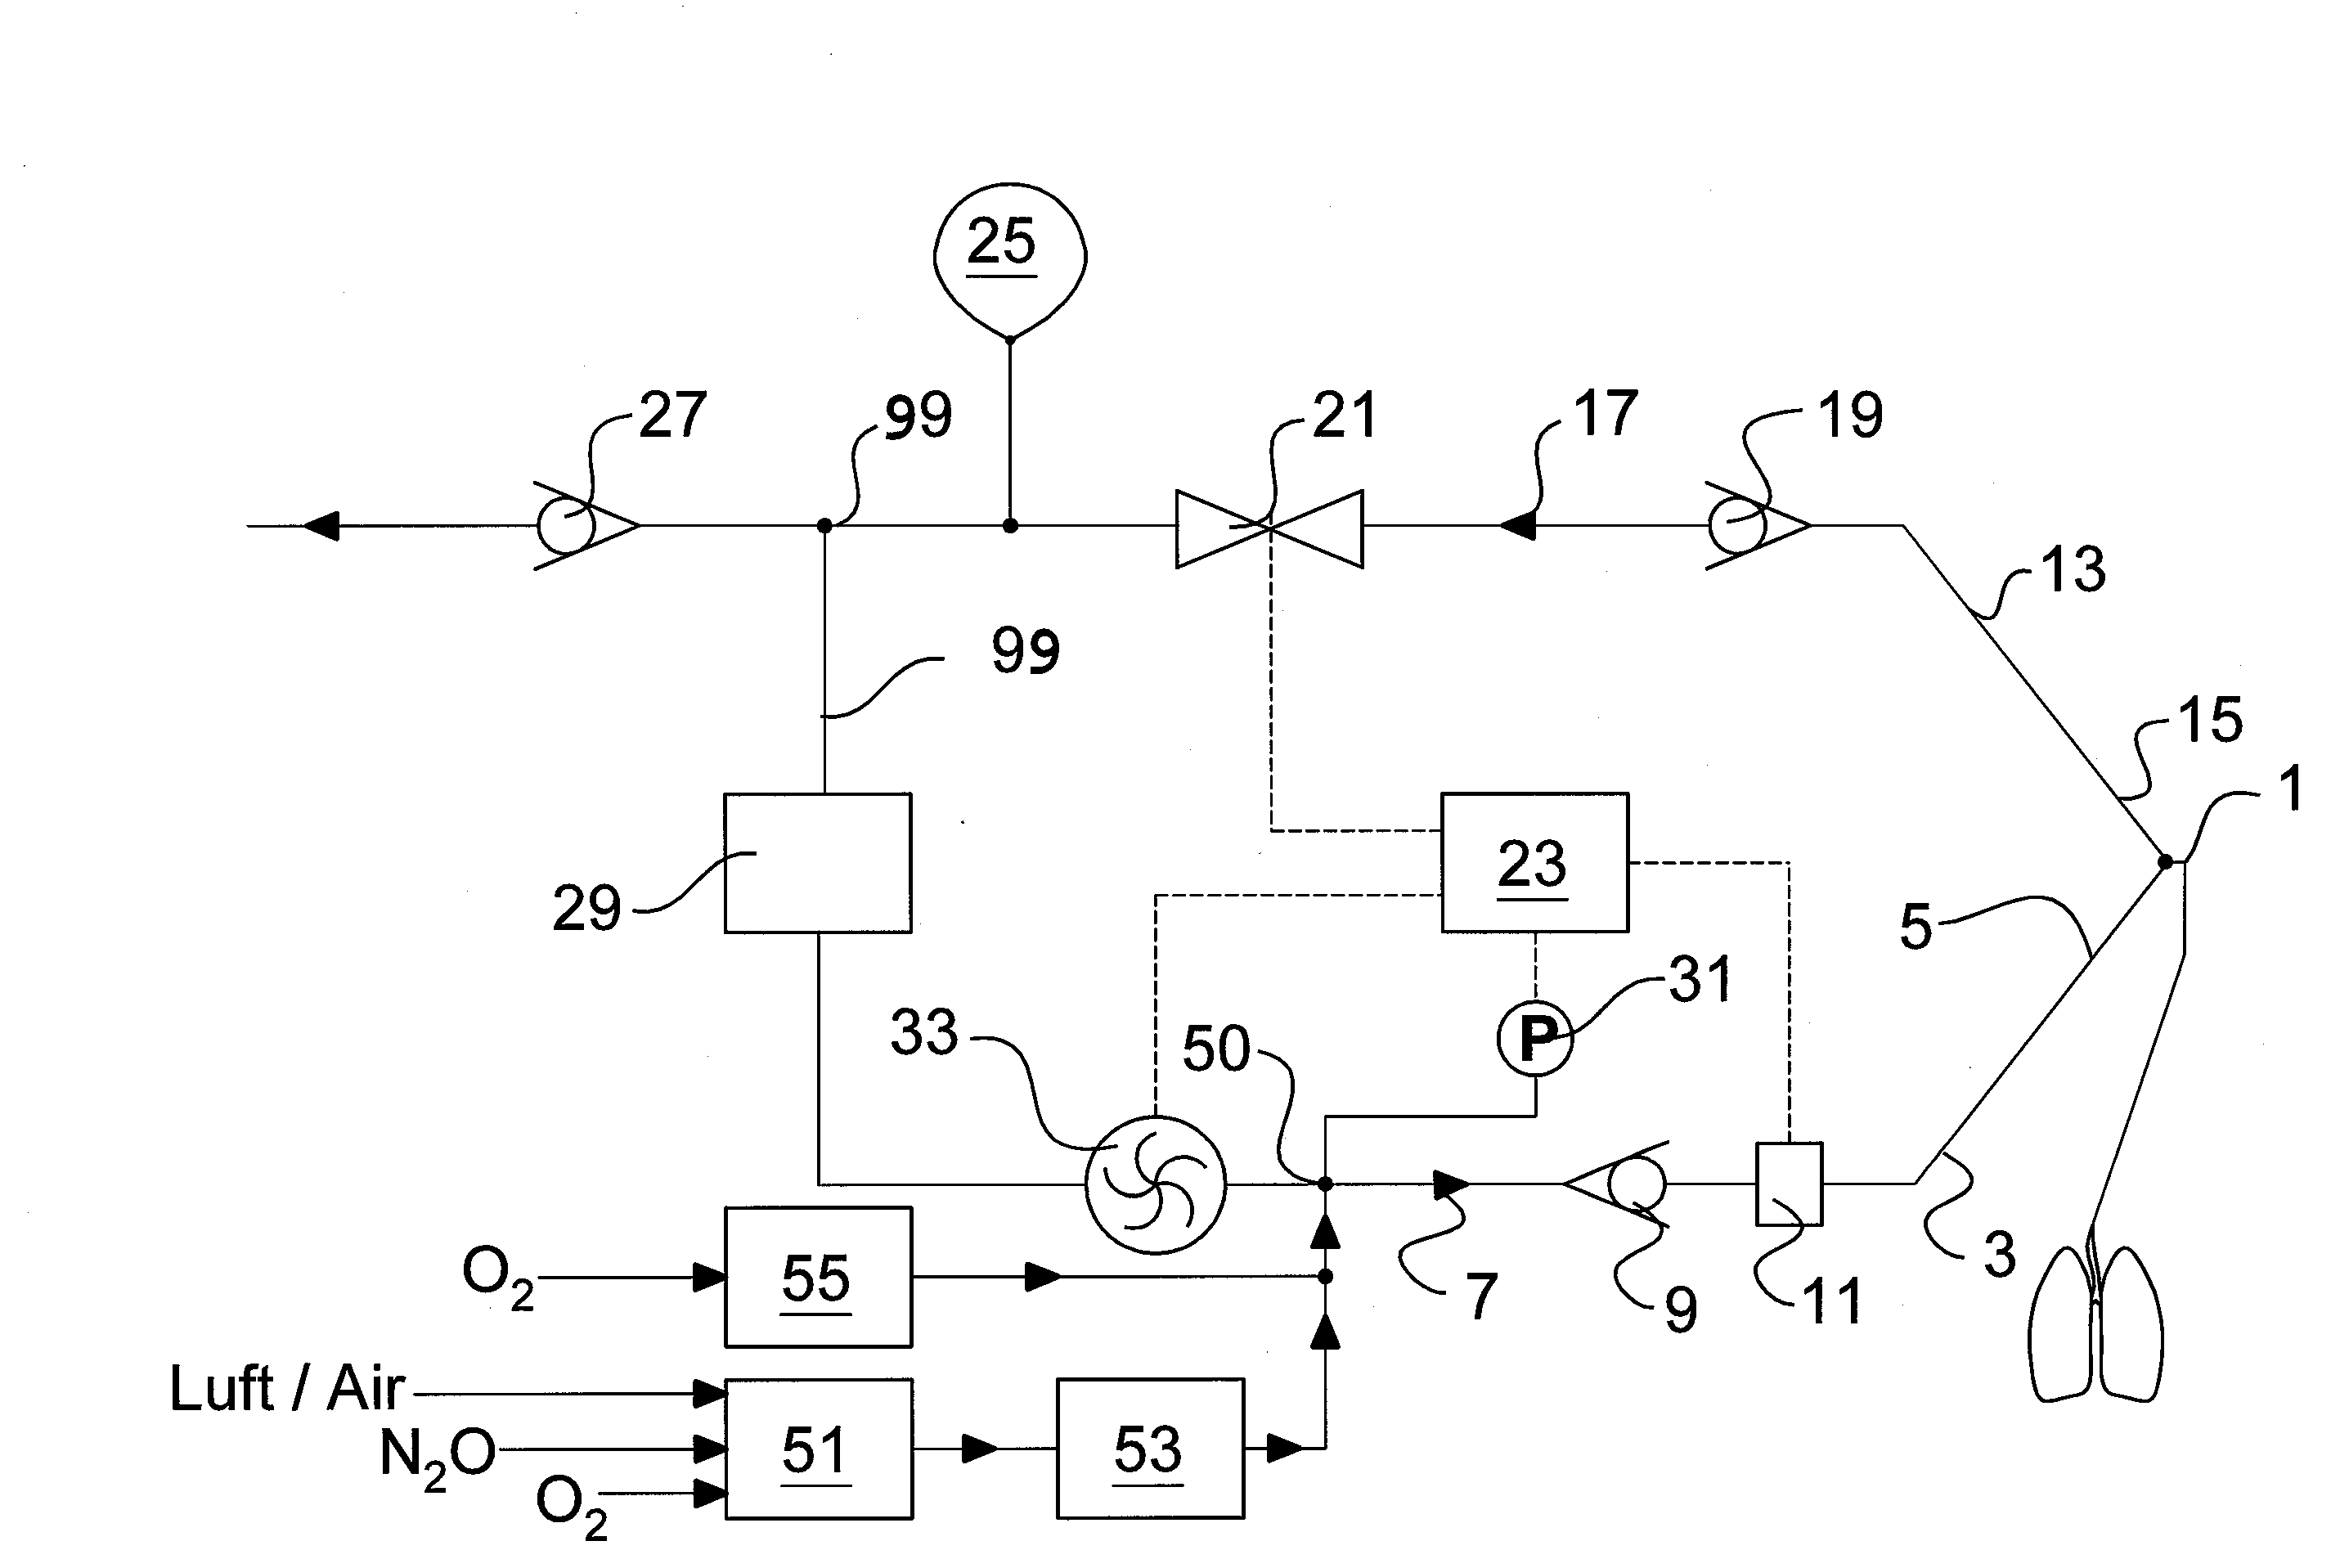 Respiration system for an anesthesia apparatus